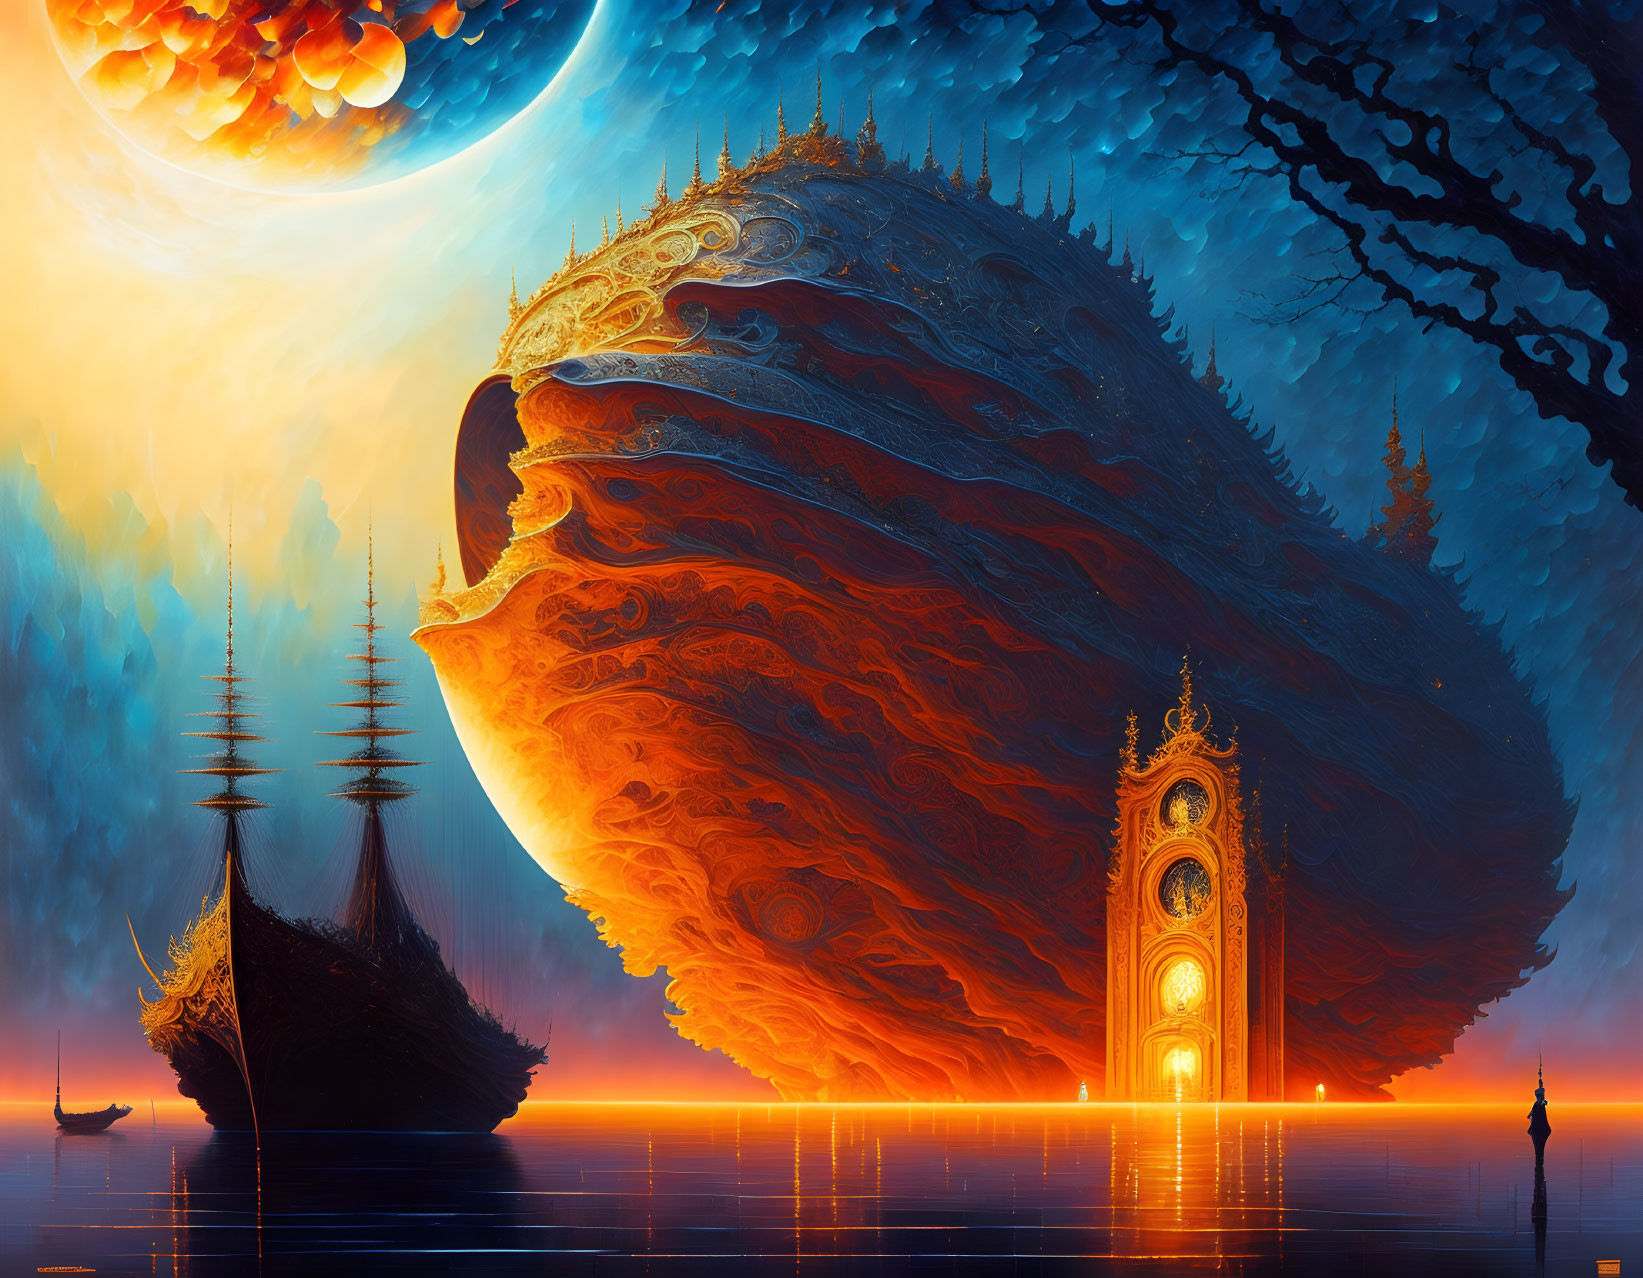 Colossal fiery planet over tranquil sea with sailing ships and glowing doorway